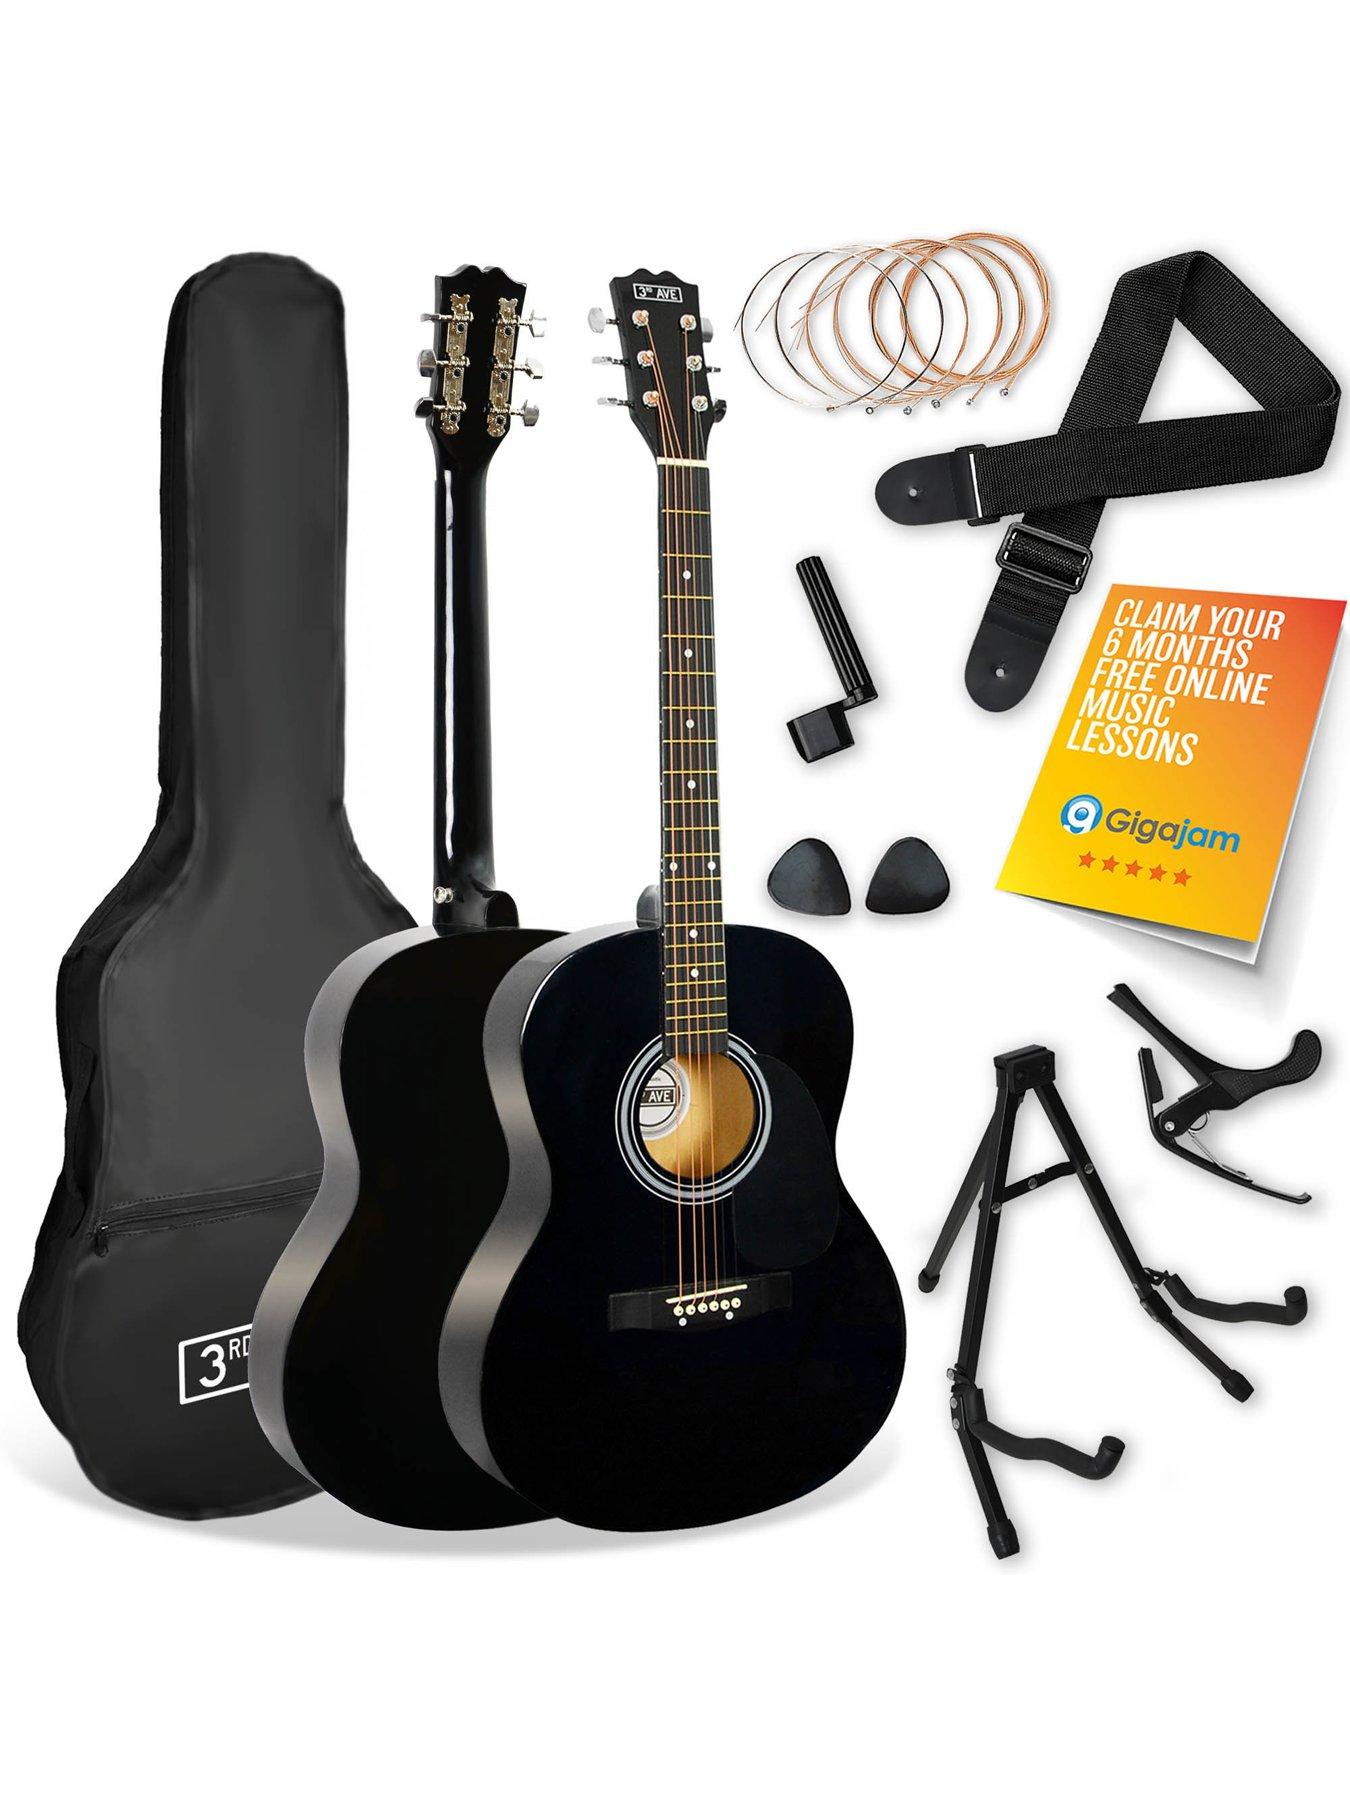 Rockin' Instruments 3 in 1 Multifunction Guitar Accessory: Peg String